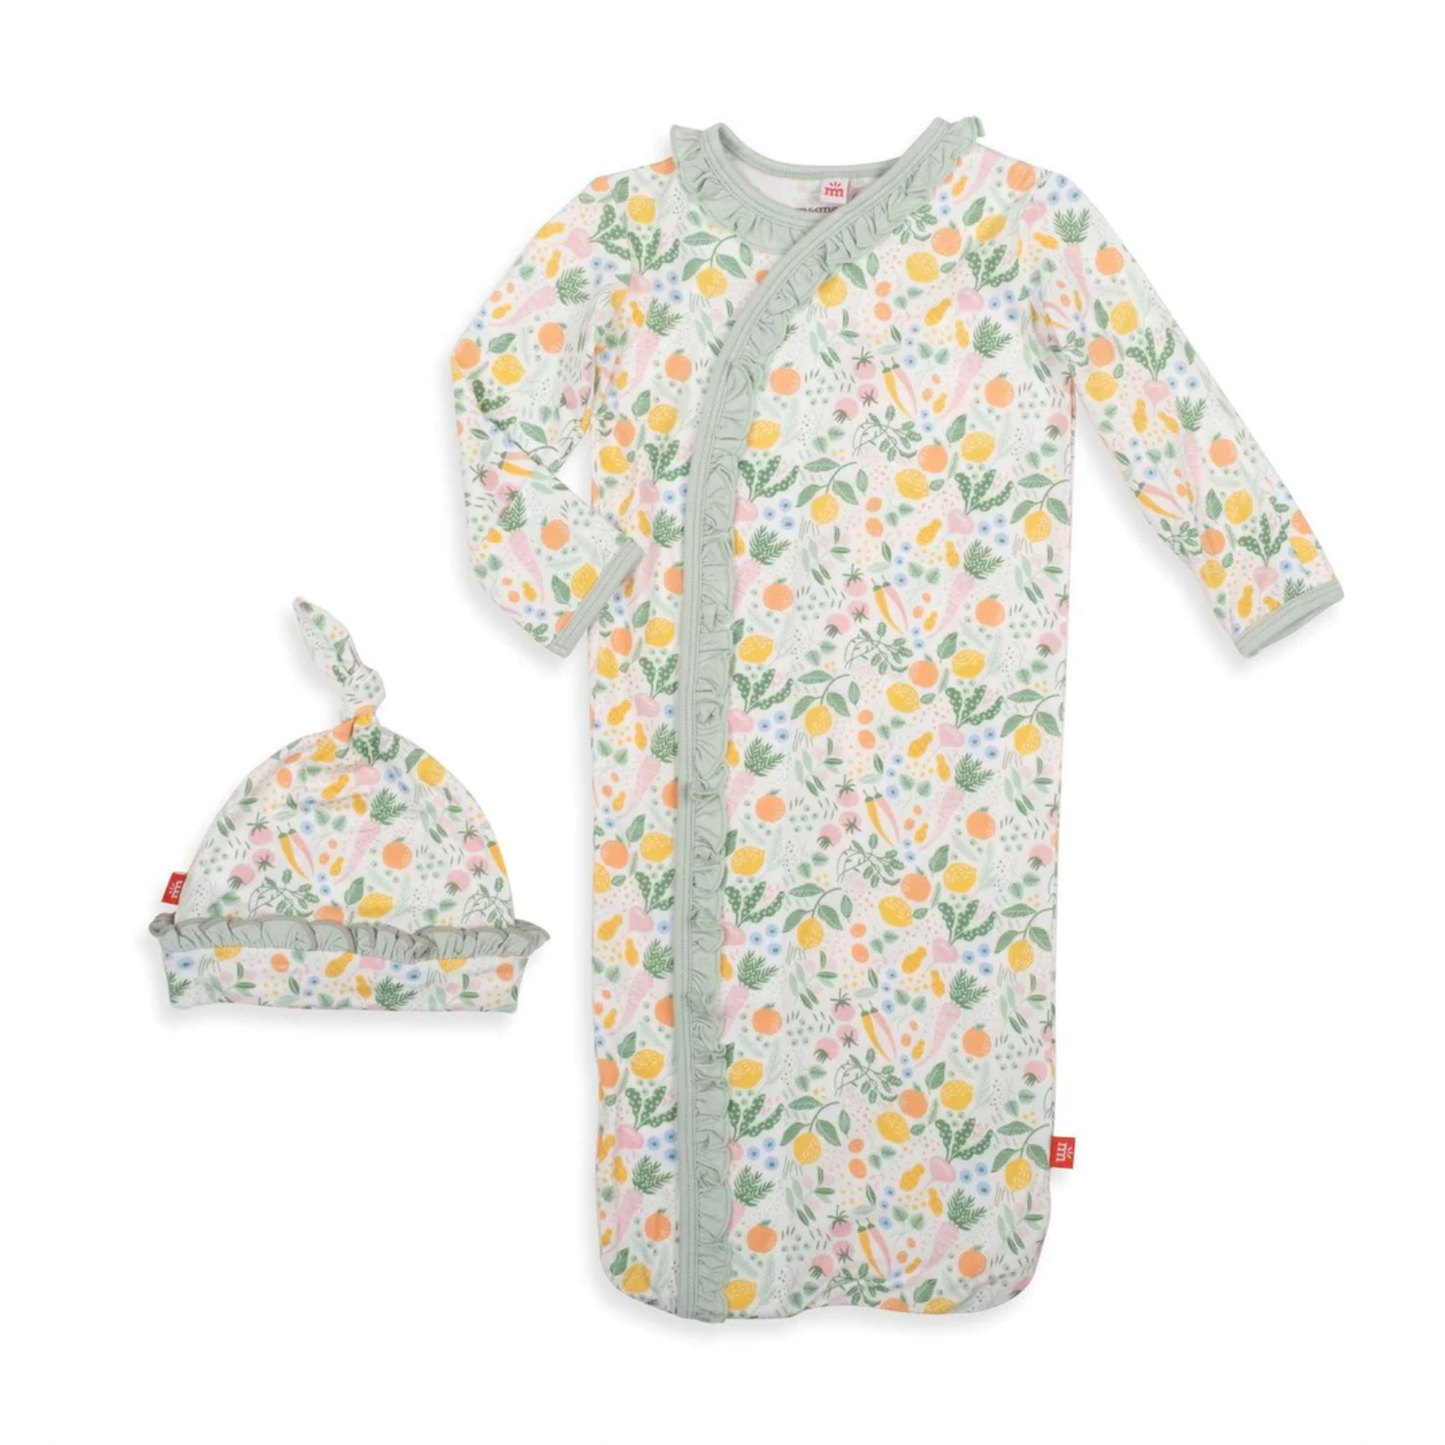 My Zest Life Modal Magnetic Cozy Sleeper Gown + Hat Set